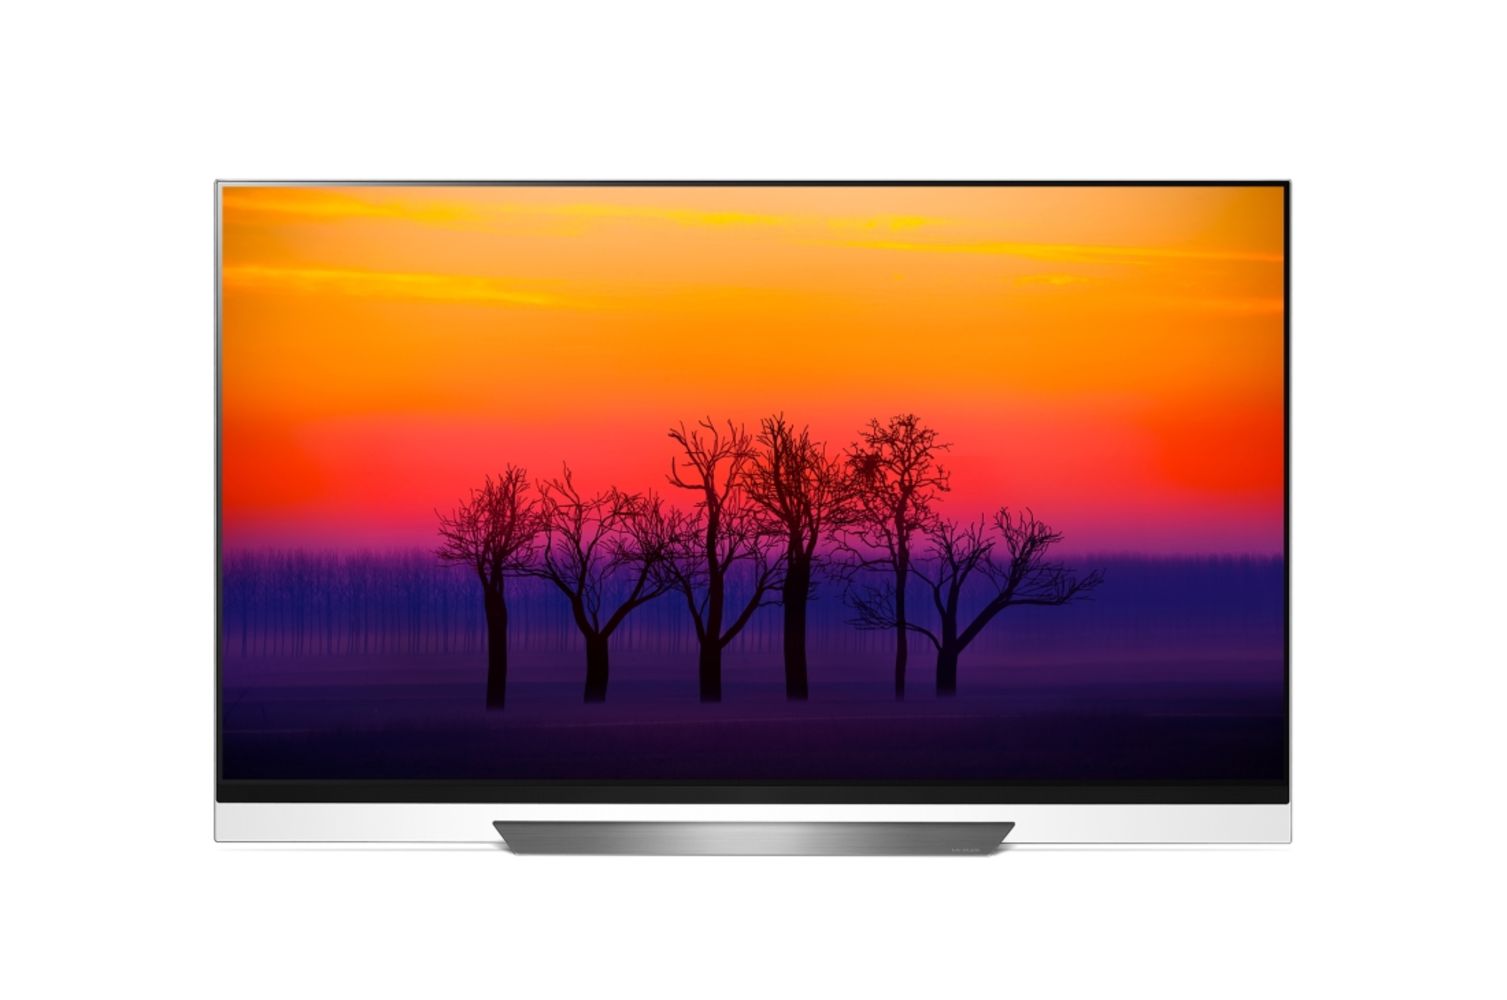 LG TVs & Monitors - Including 4K UHD Smart TVs Up To 77", HD Monitors Including Commercial and Gaming Specs